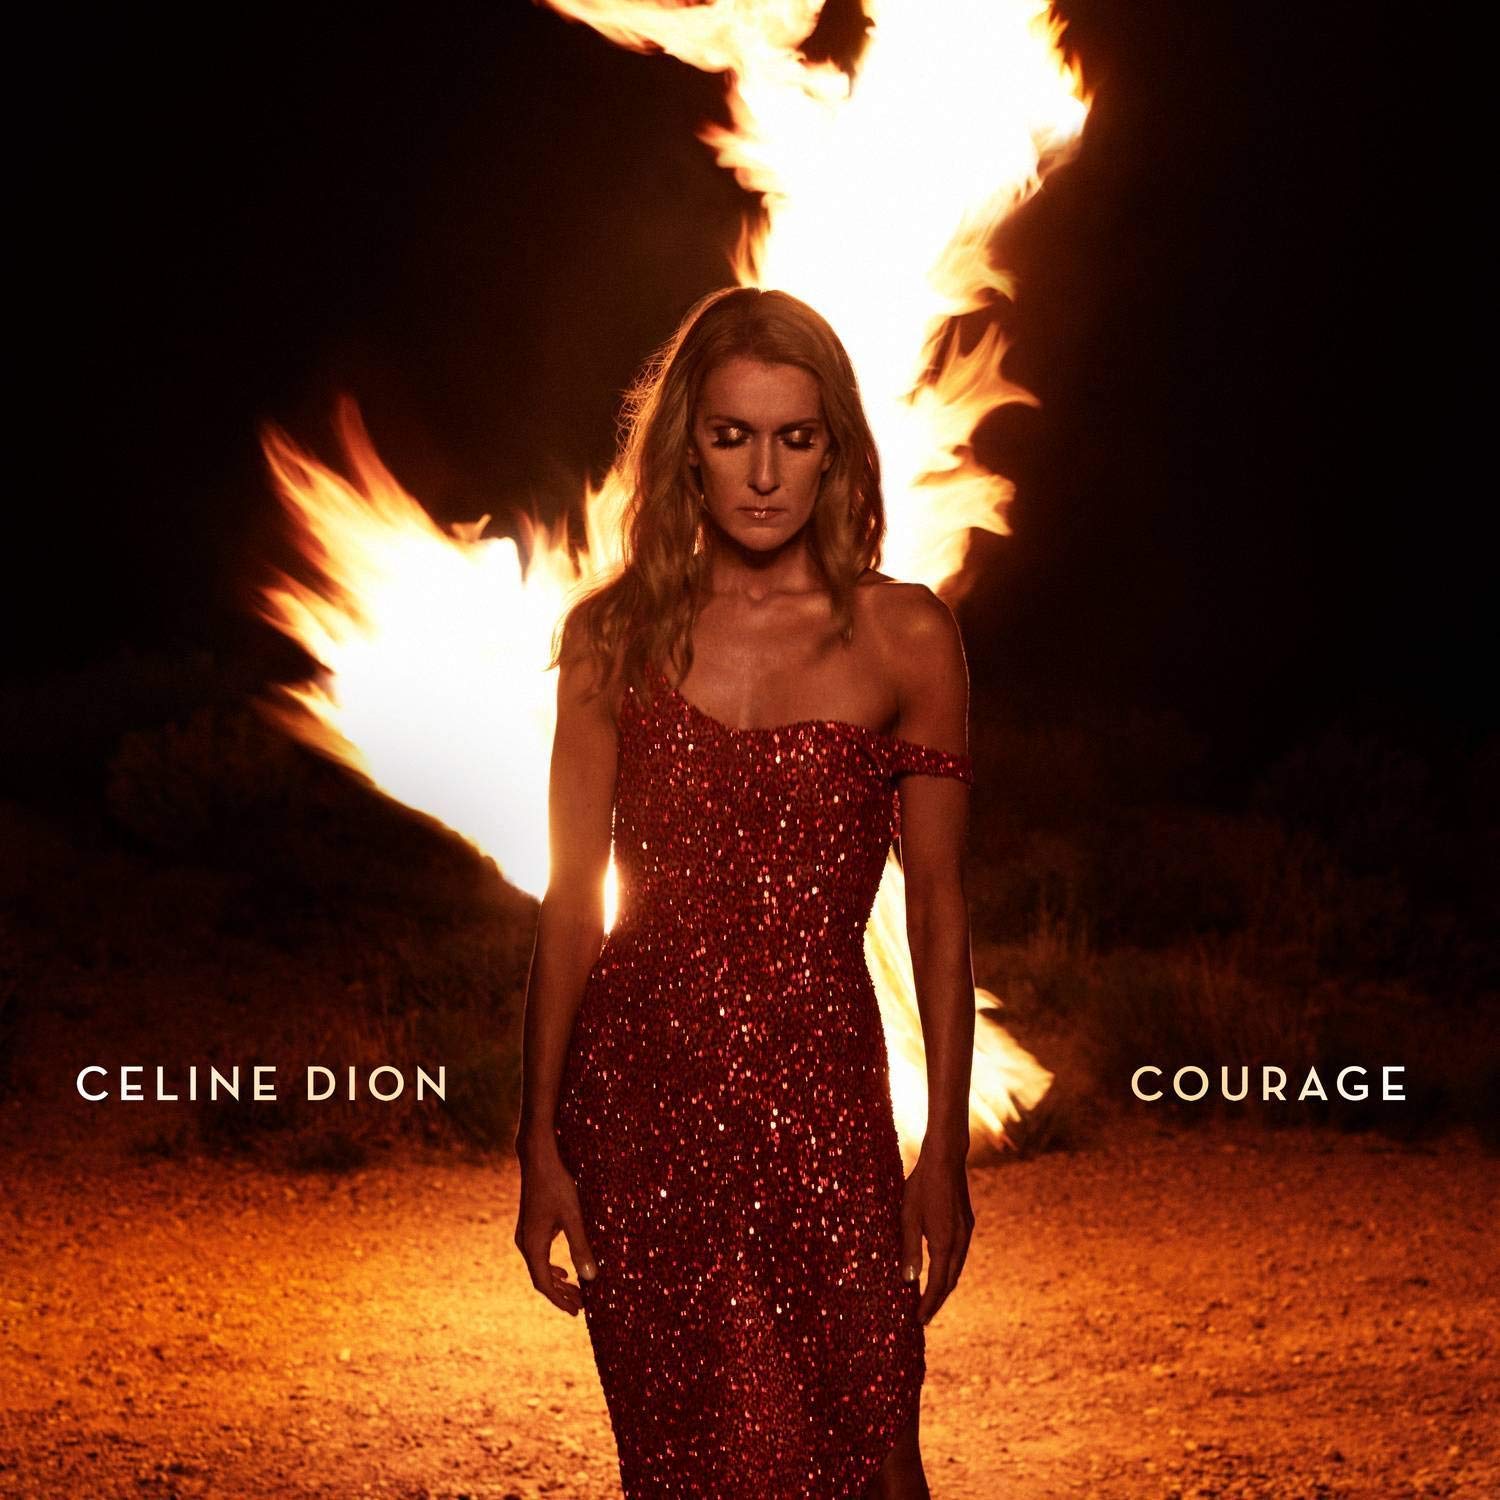 Have You Listened To Celine Dion’s “Courage”?